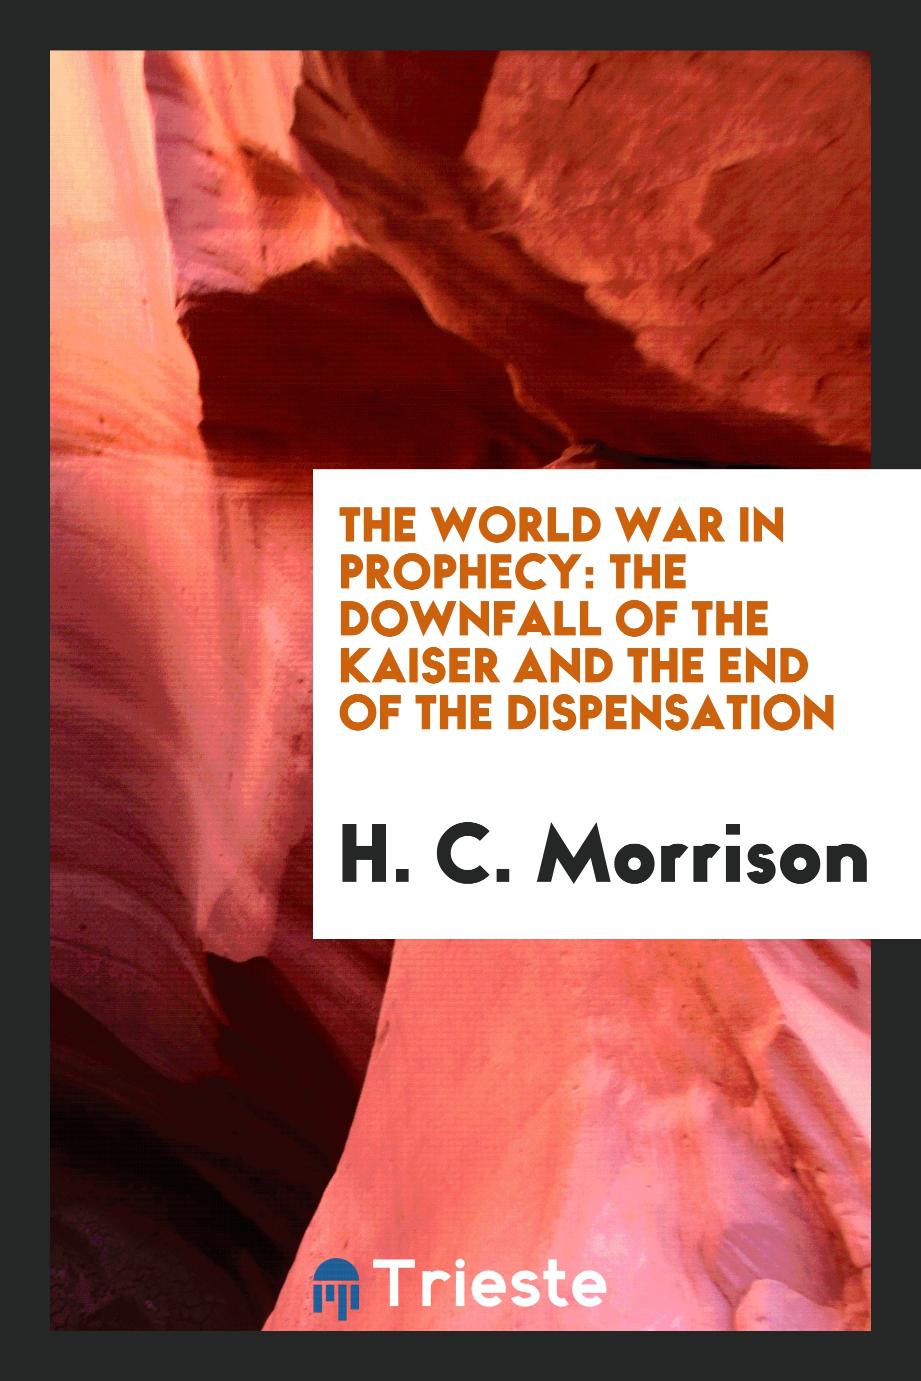 The World War in Prophecy: The Downfall of the Kaiser and the End of the Dispensation